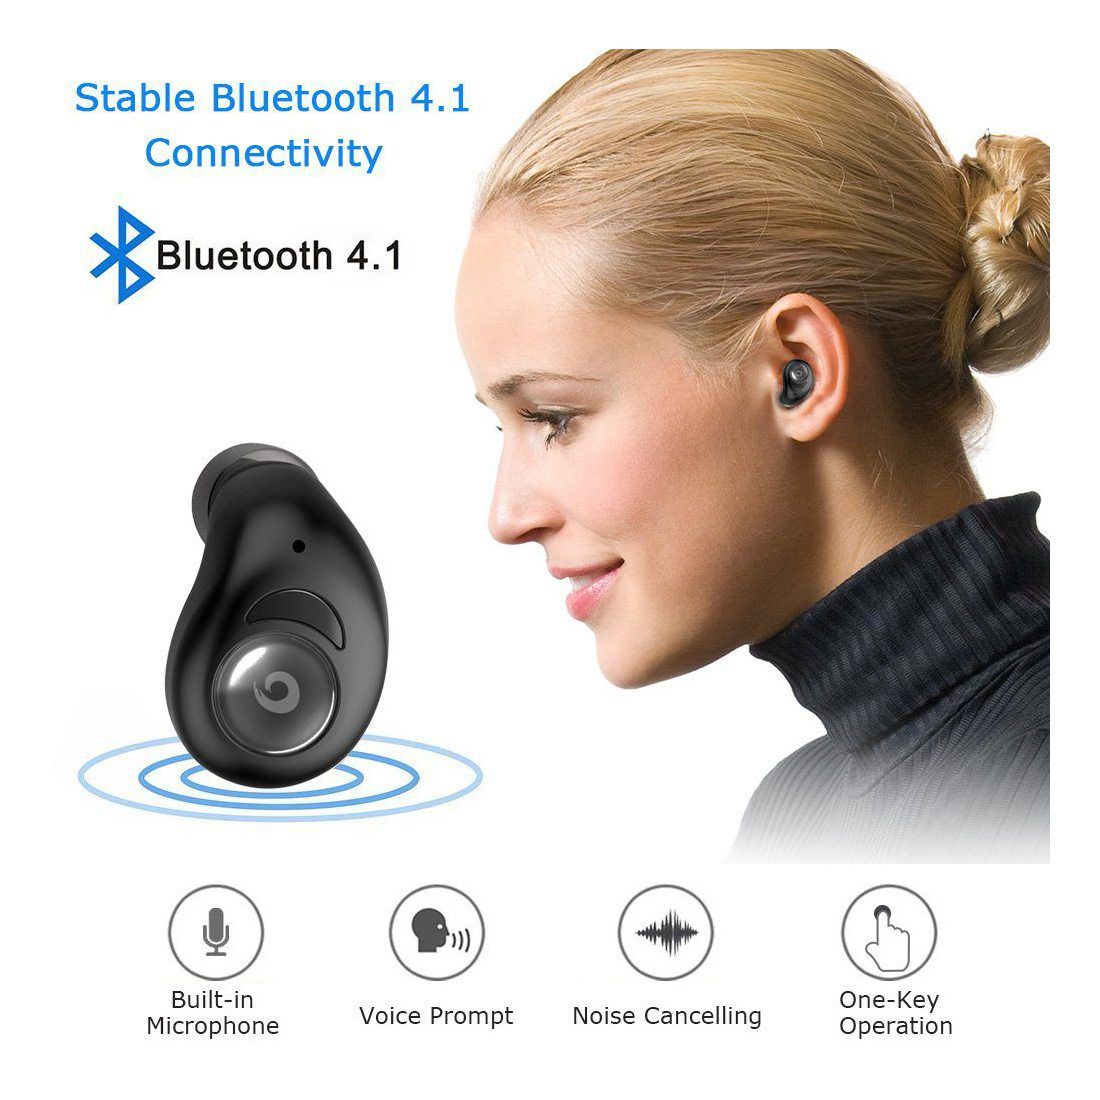 True Wireless stereo Gaming Earbuds.